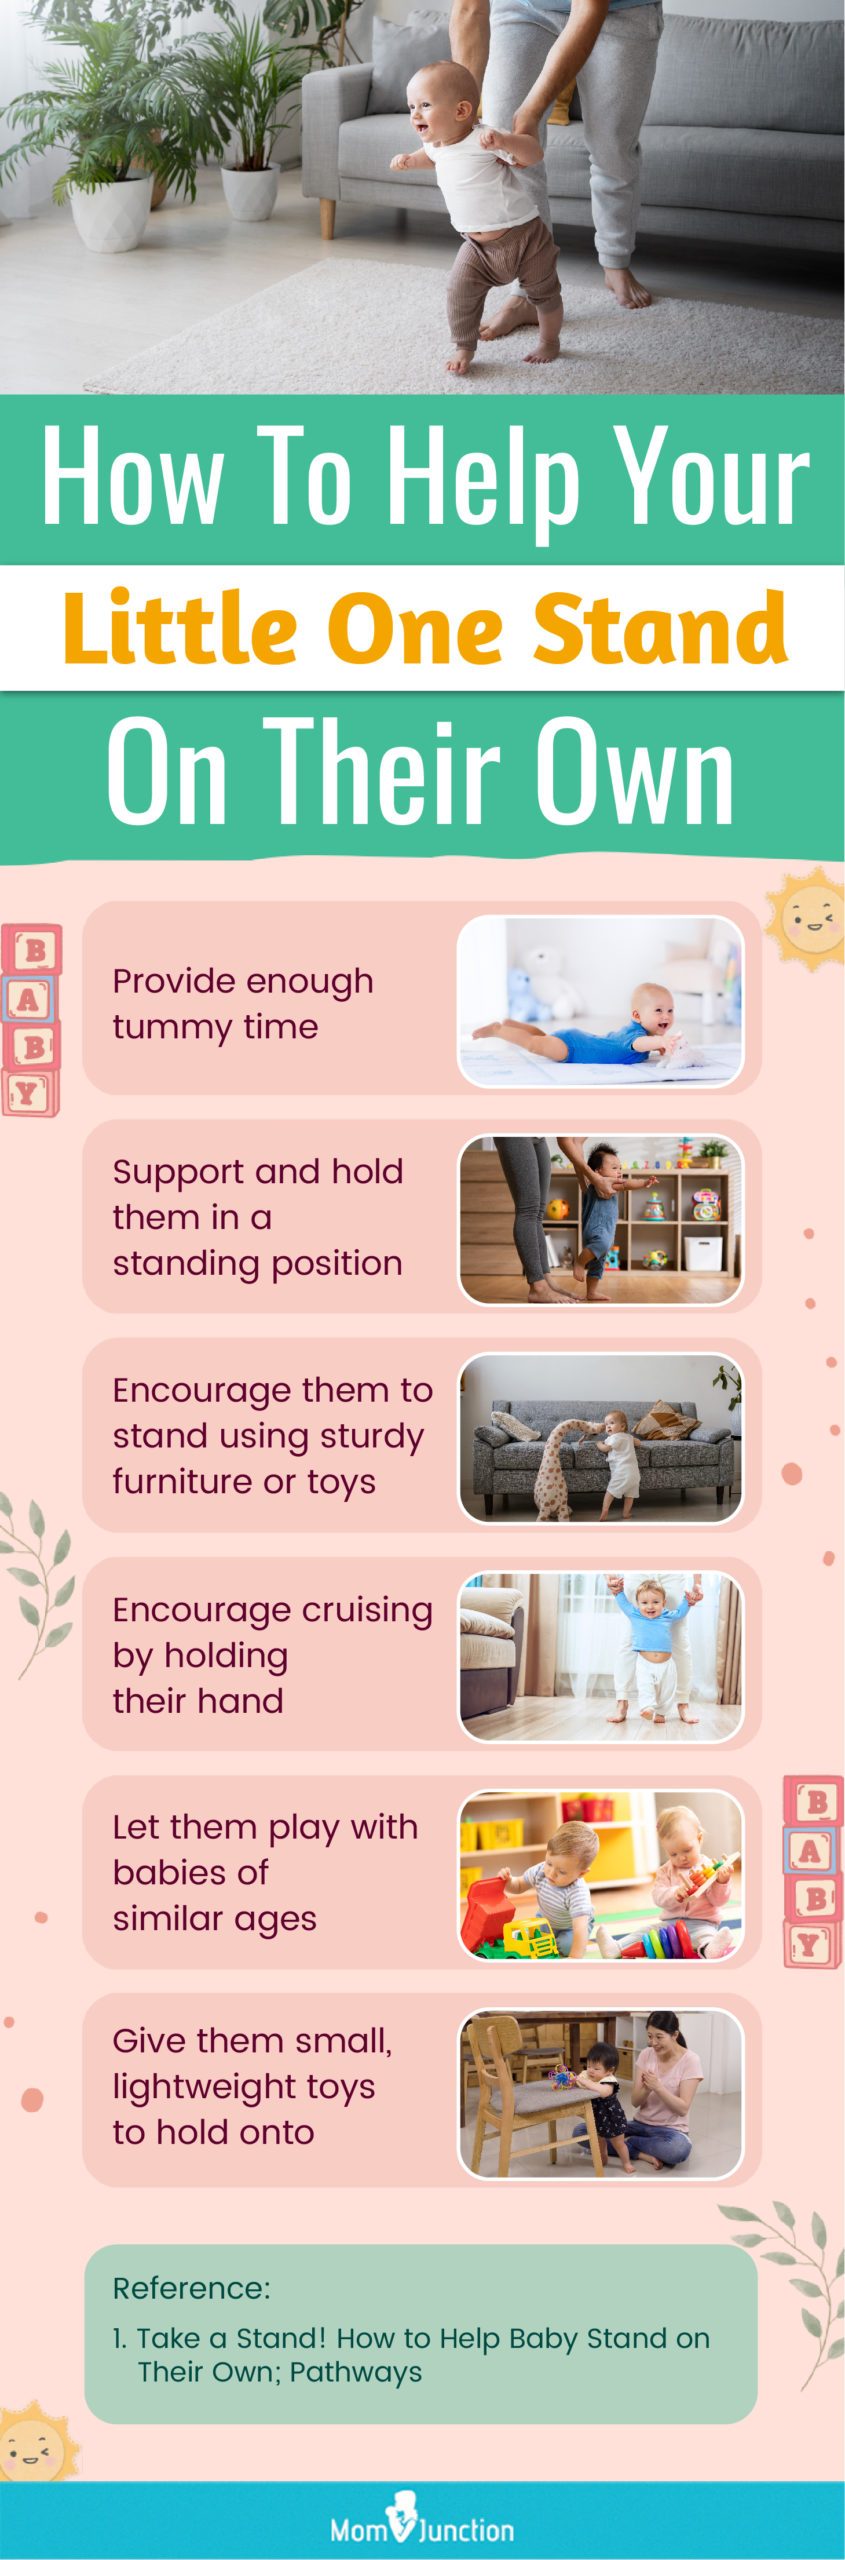 how to help your little one stand on their own (infographic)